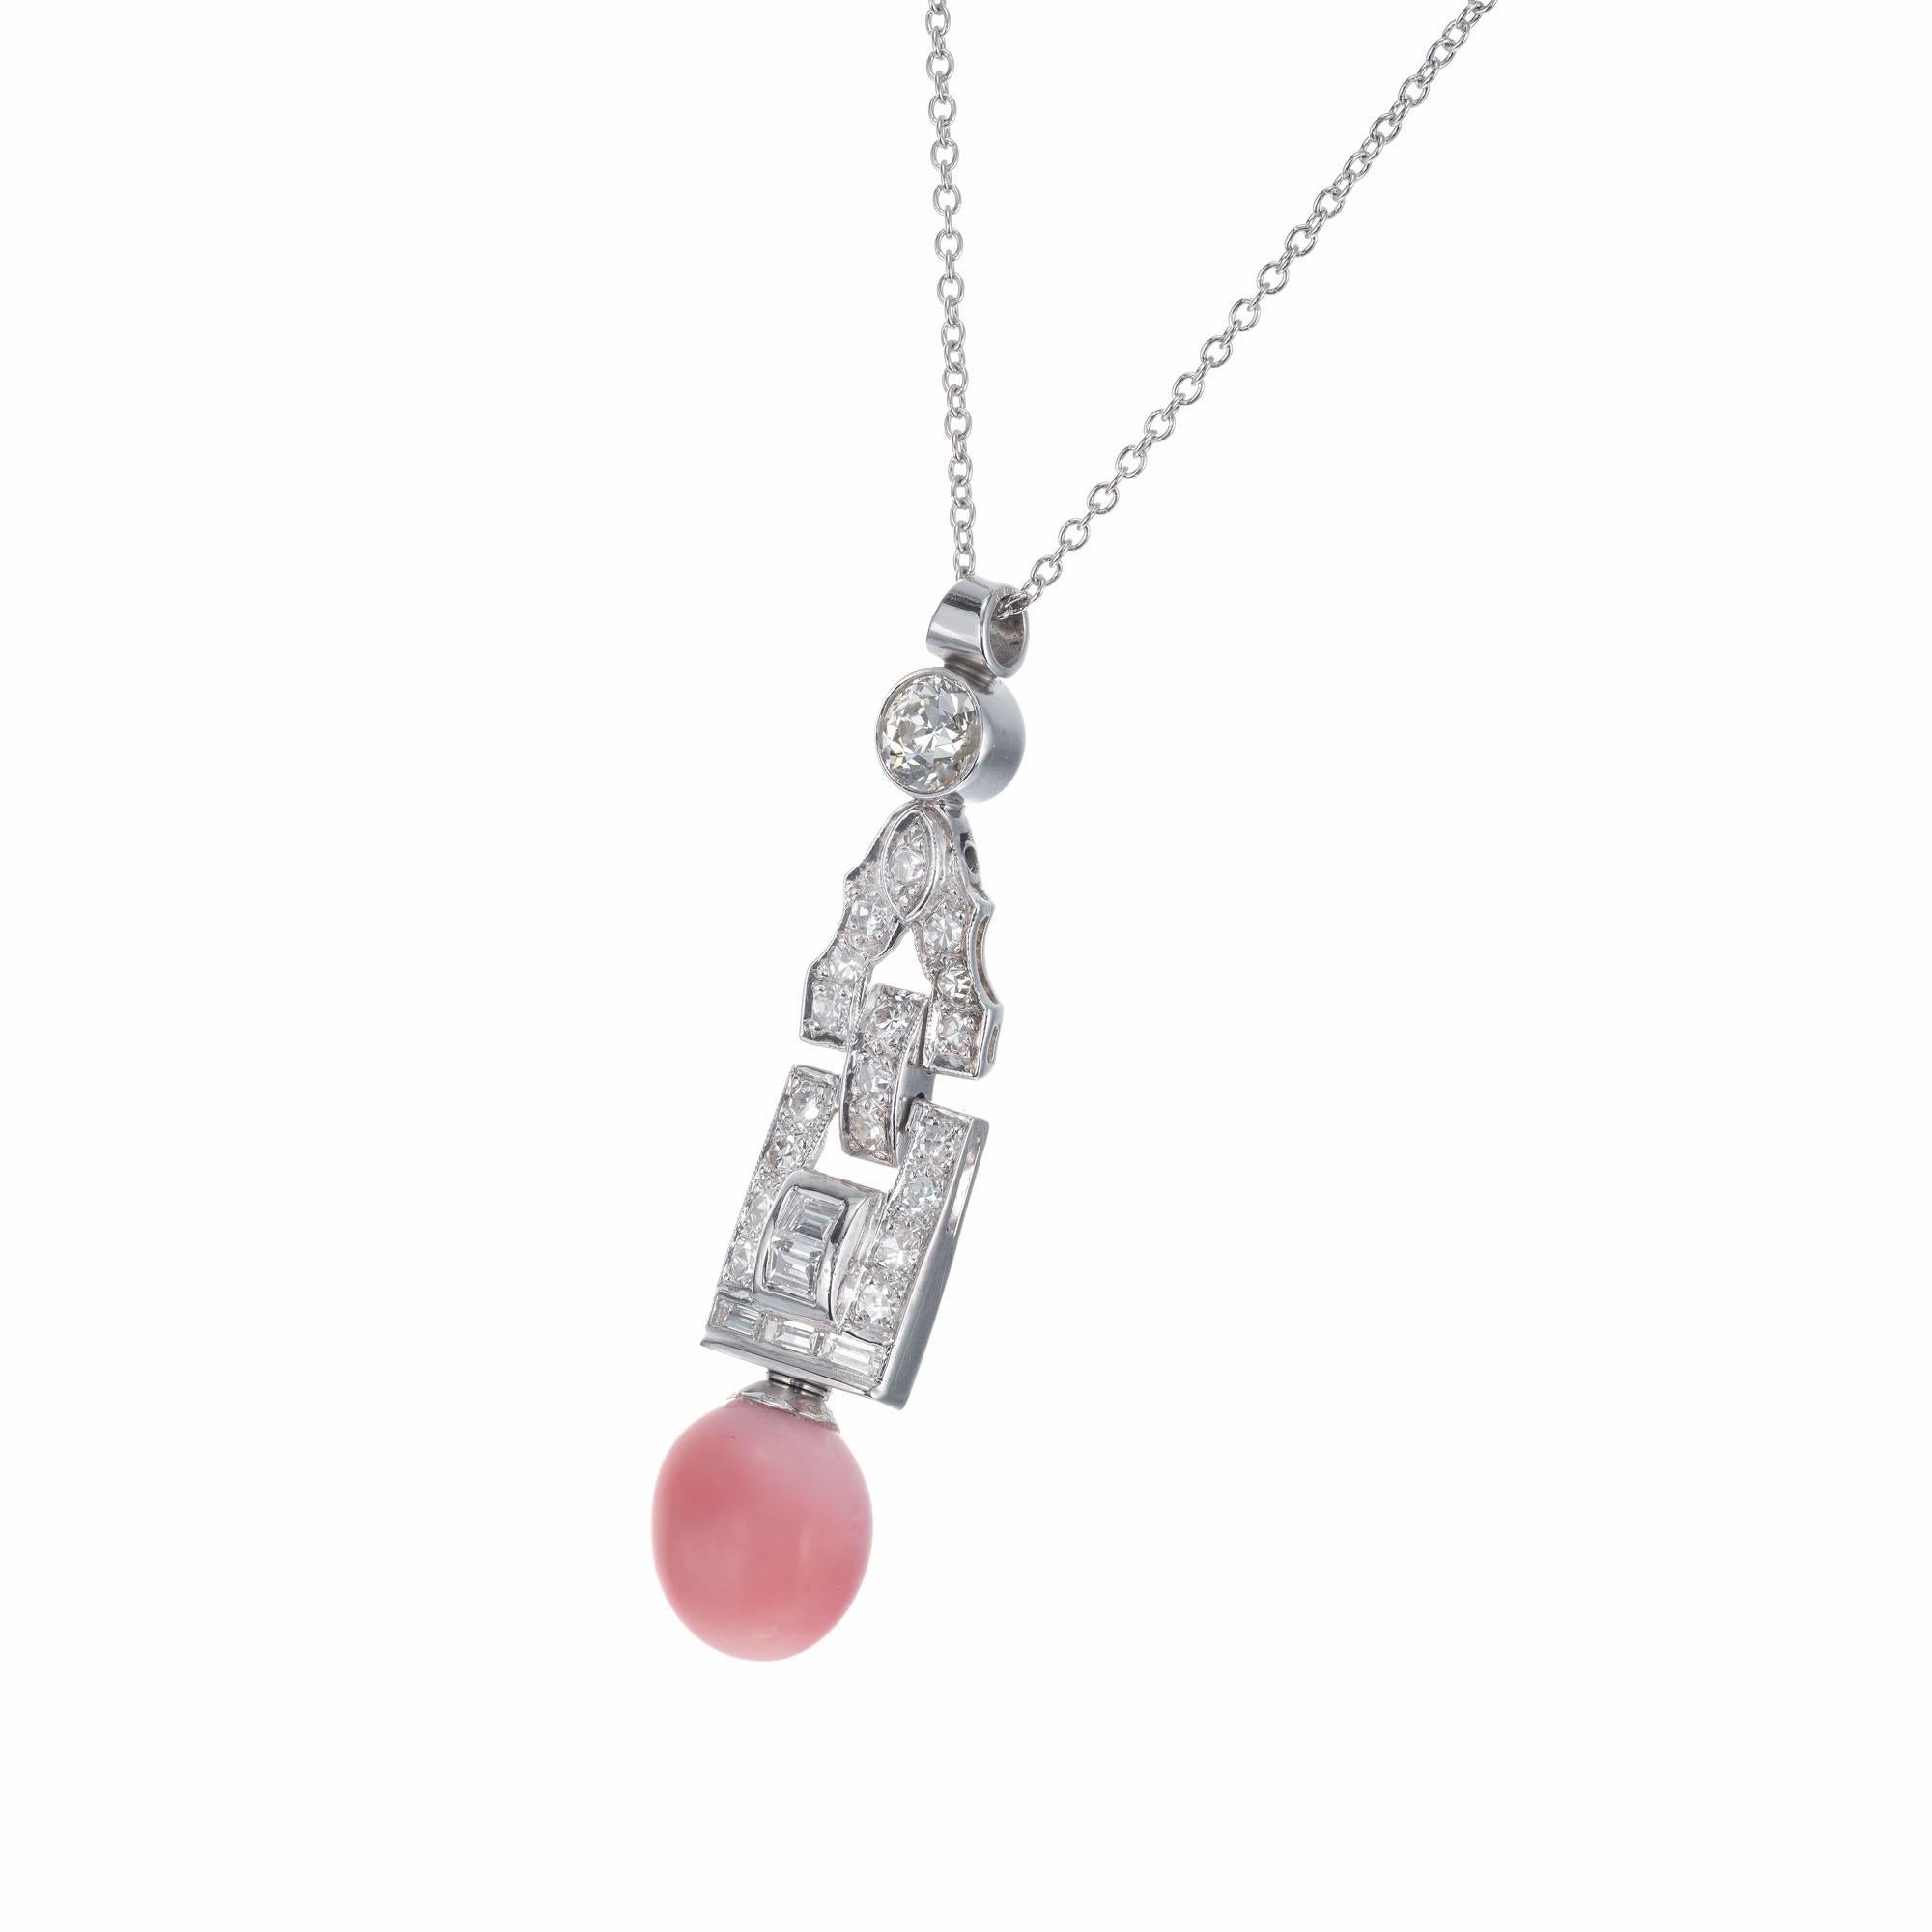 Original Art Deco 1920’s pendant set with a natural conch pink pearl and European and baguette cut accent diamonds, with a 16 inch platinum chain. GIA Certified 

1 saltwater conch pink pearl, approx. 5.11cts GIA Certificate # 2205201063
1 Old